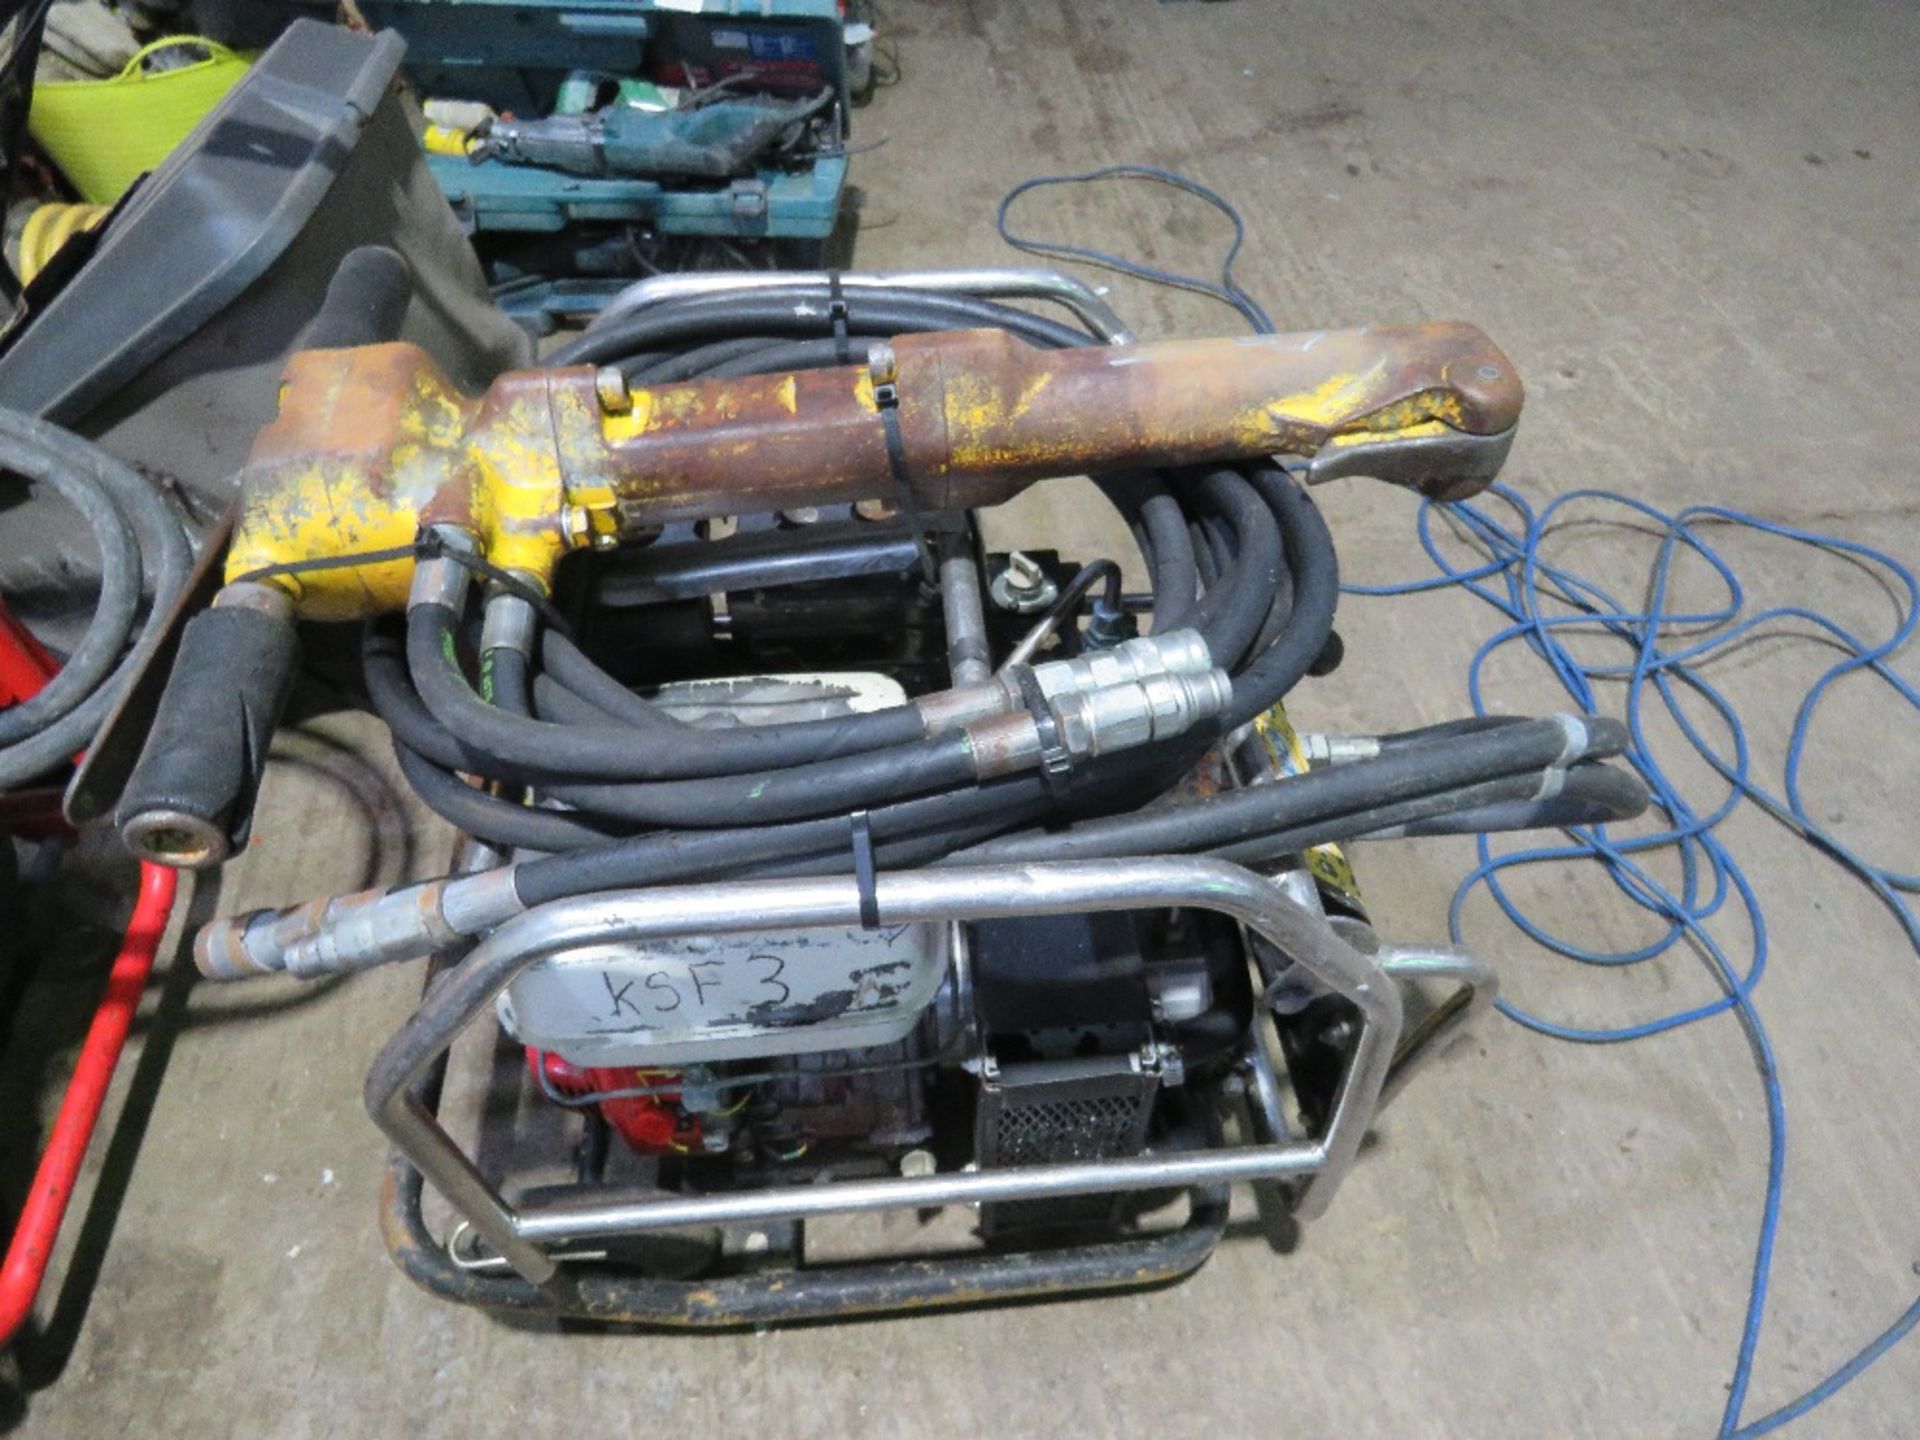 JCB HYDRAULIC BREAKER PACK WITH HOSE AND GUN. - Image 3 of 4